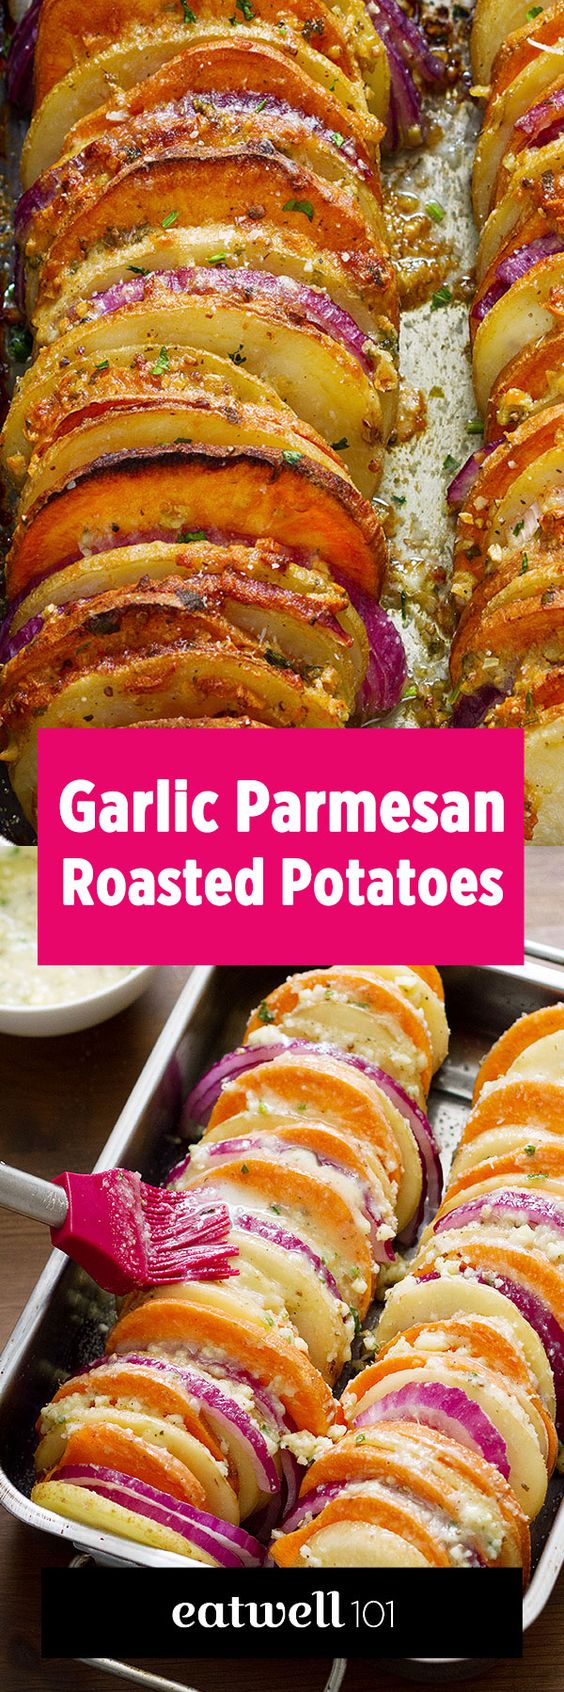 Garlic Parmesan Roasted Potatoes Recipe - #roasted #potatoes #eatwell101 - Roasted Potatoes with garlic parmesan is a quick and easy side dish ready in less than an hour.